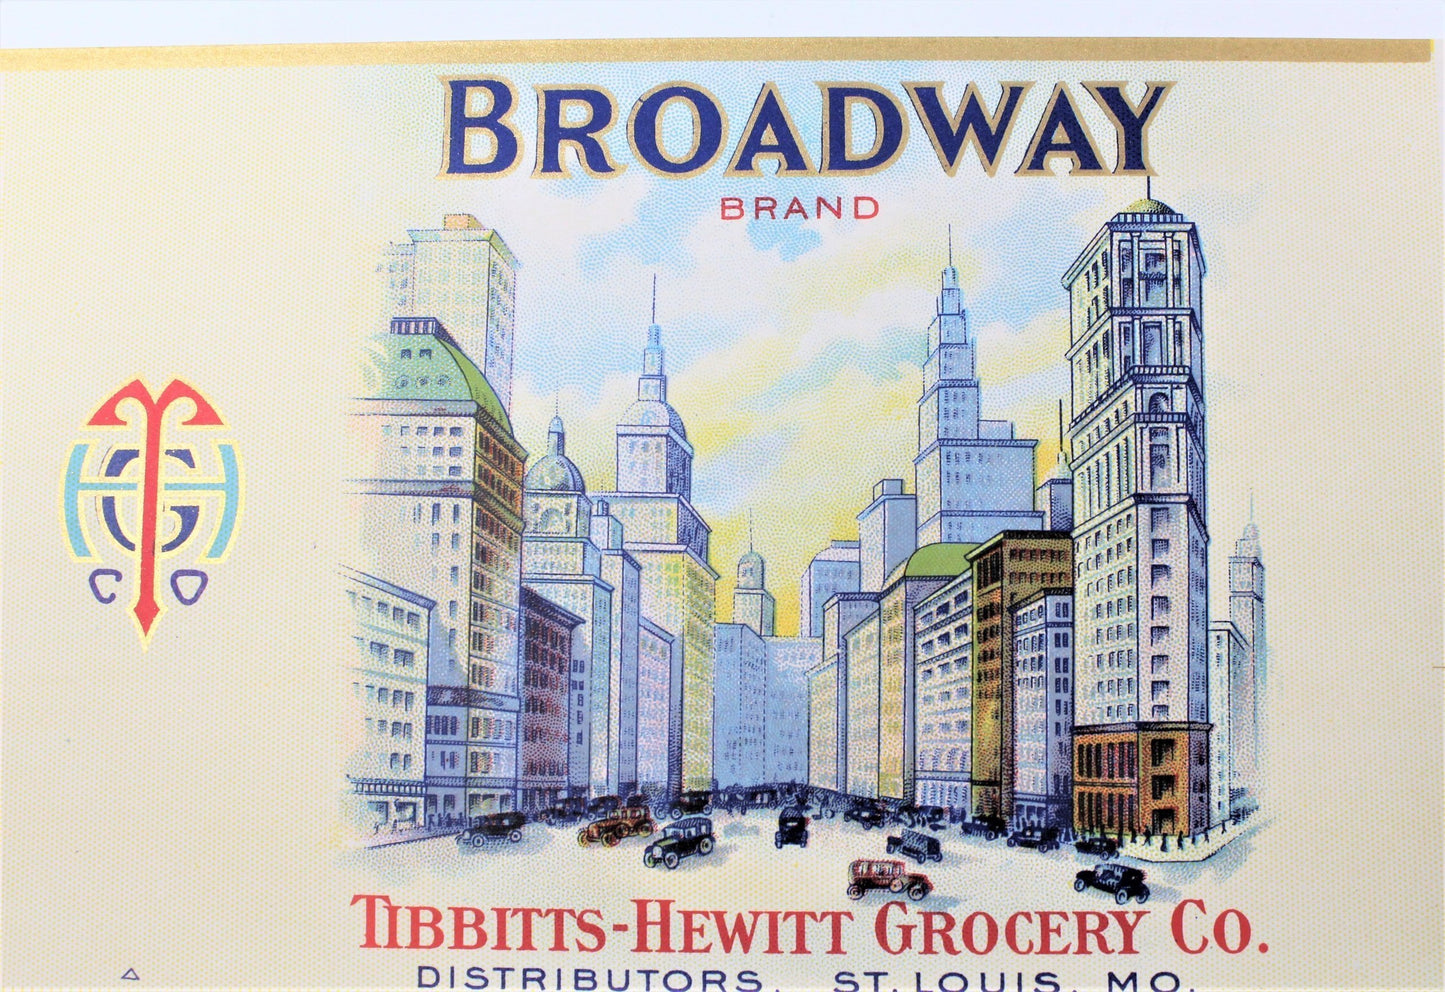 Can Label, Broadway Brand Tomatoes, Original Lithograph, NOS, Antique 1920's